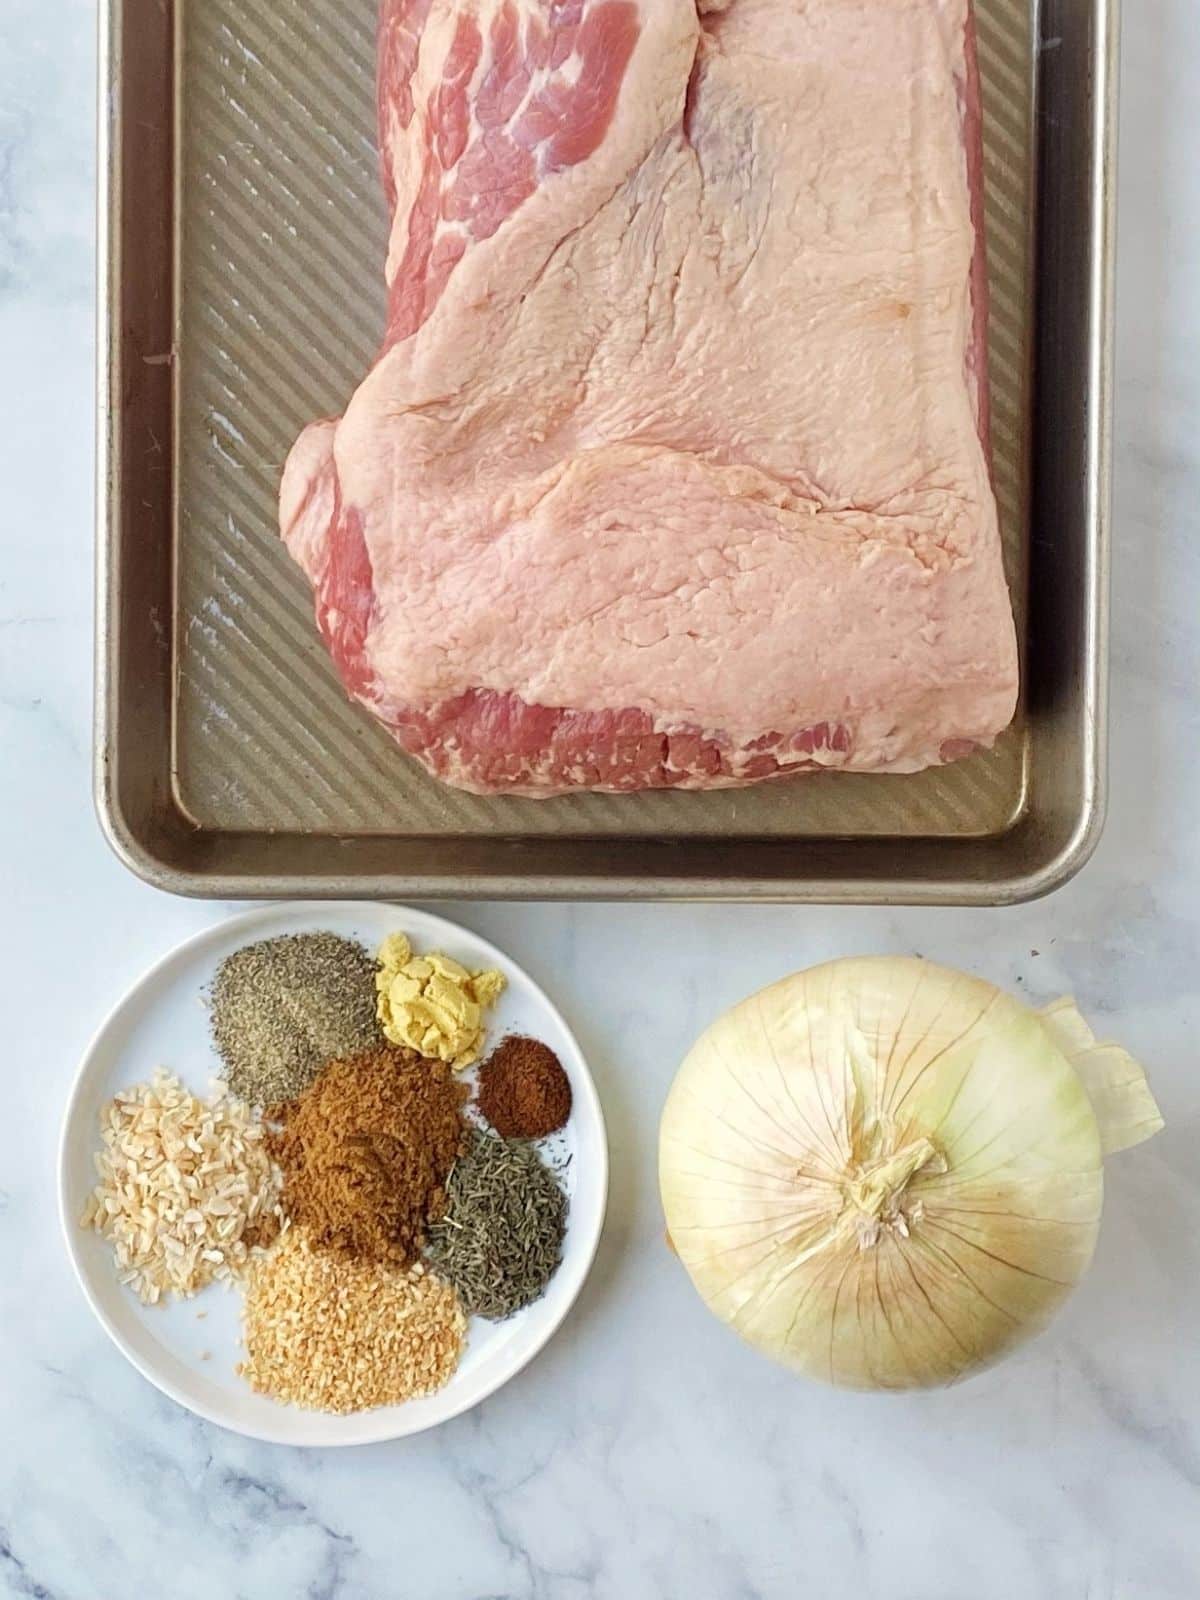 ingredients - corned beef brisket, spices, and onion